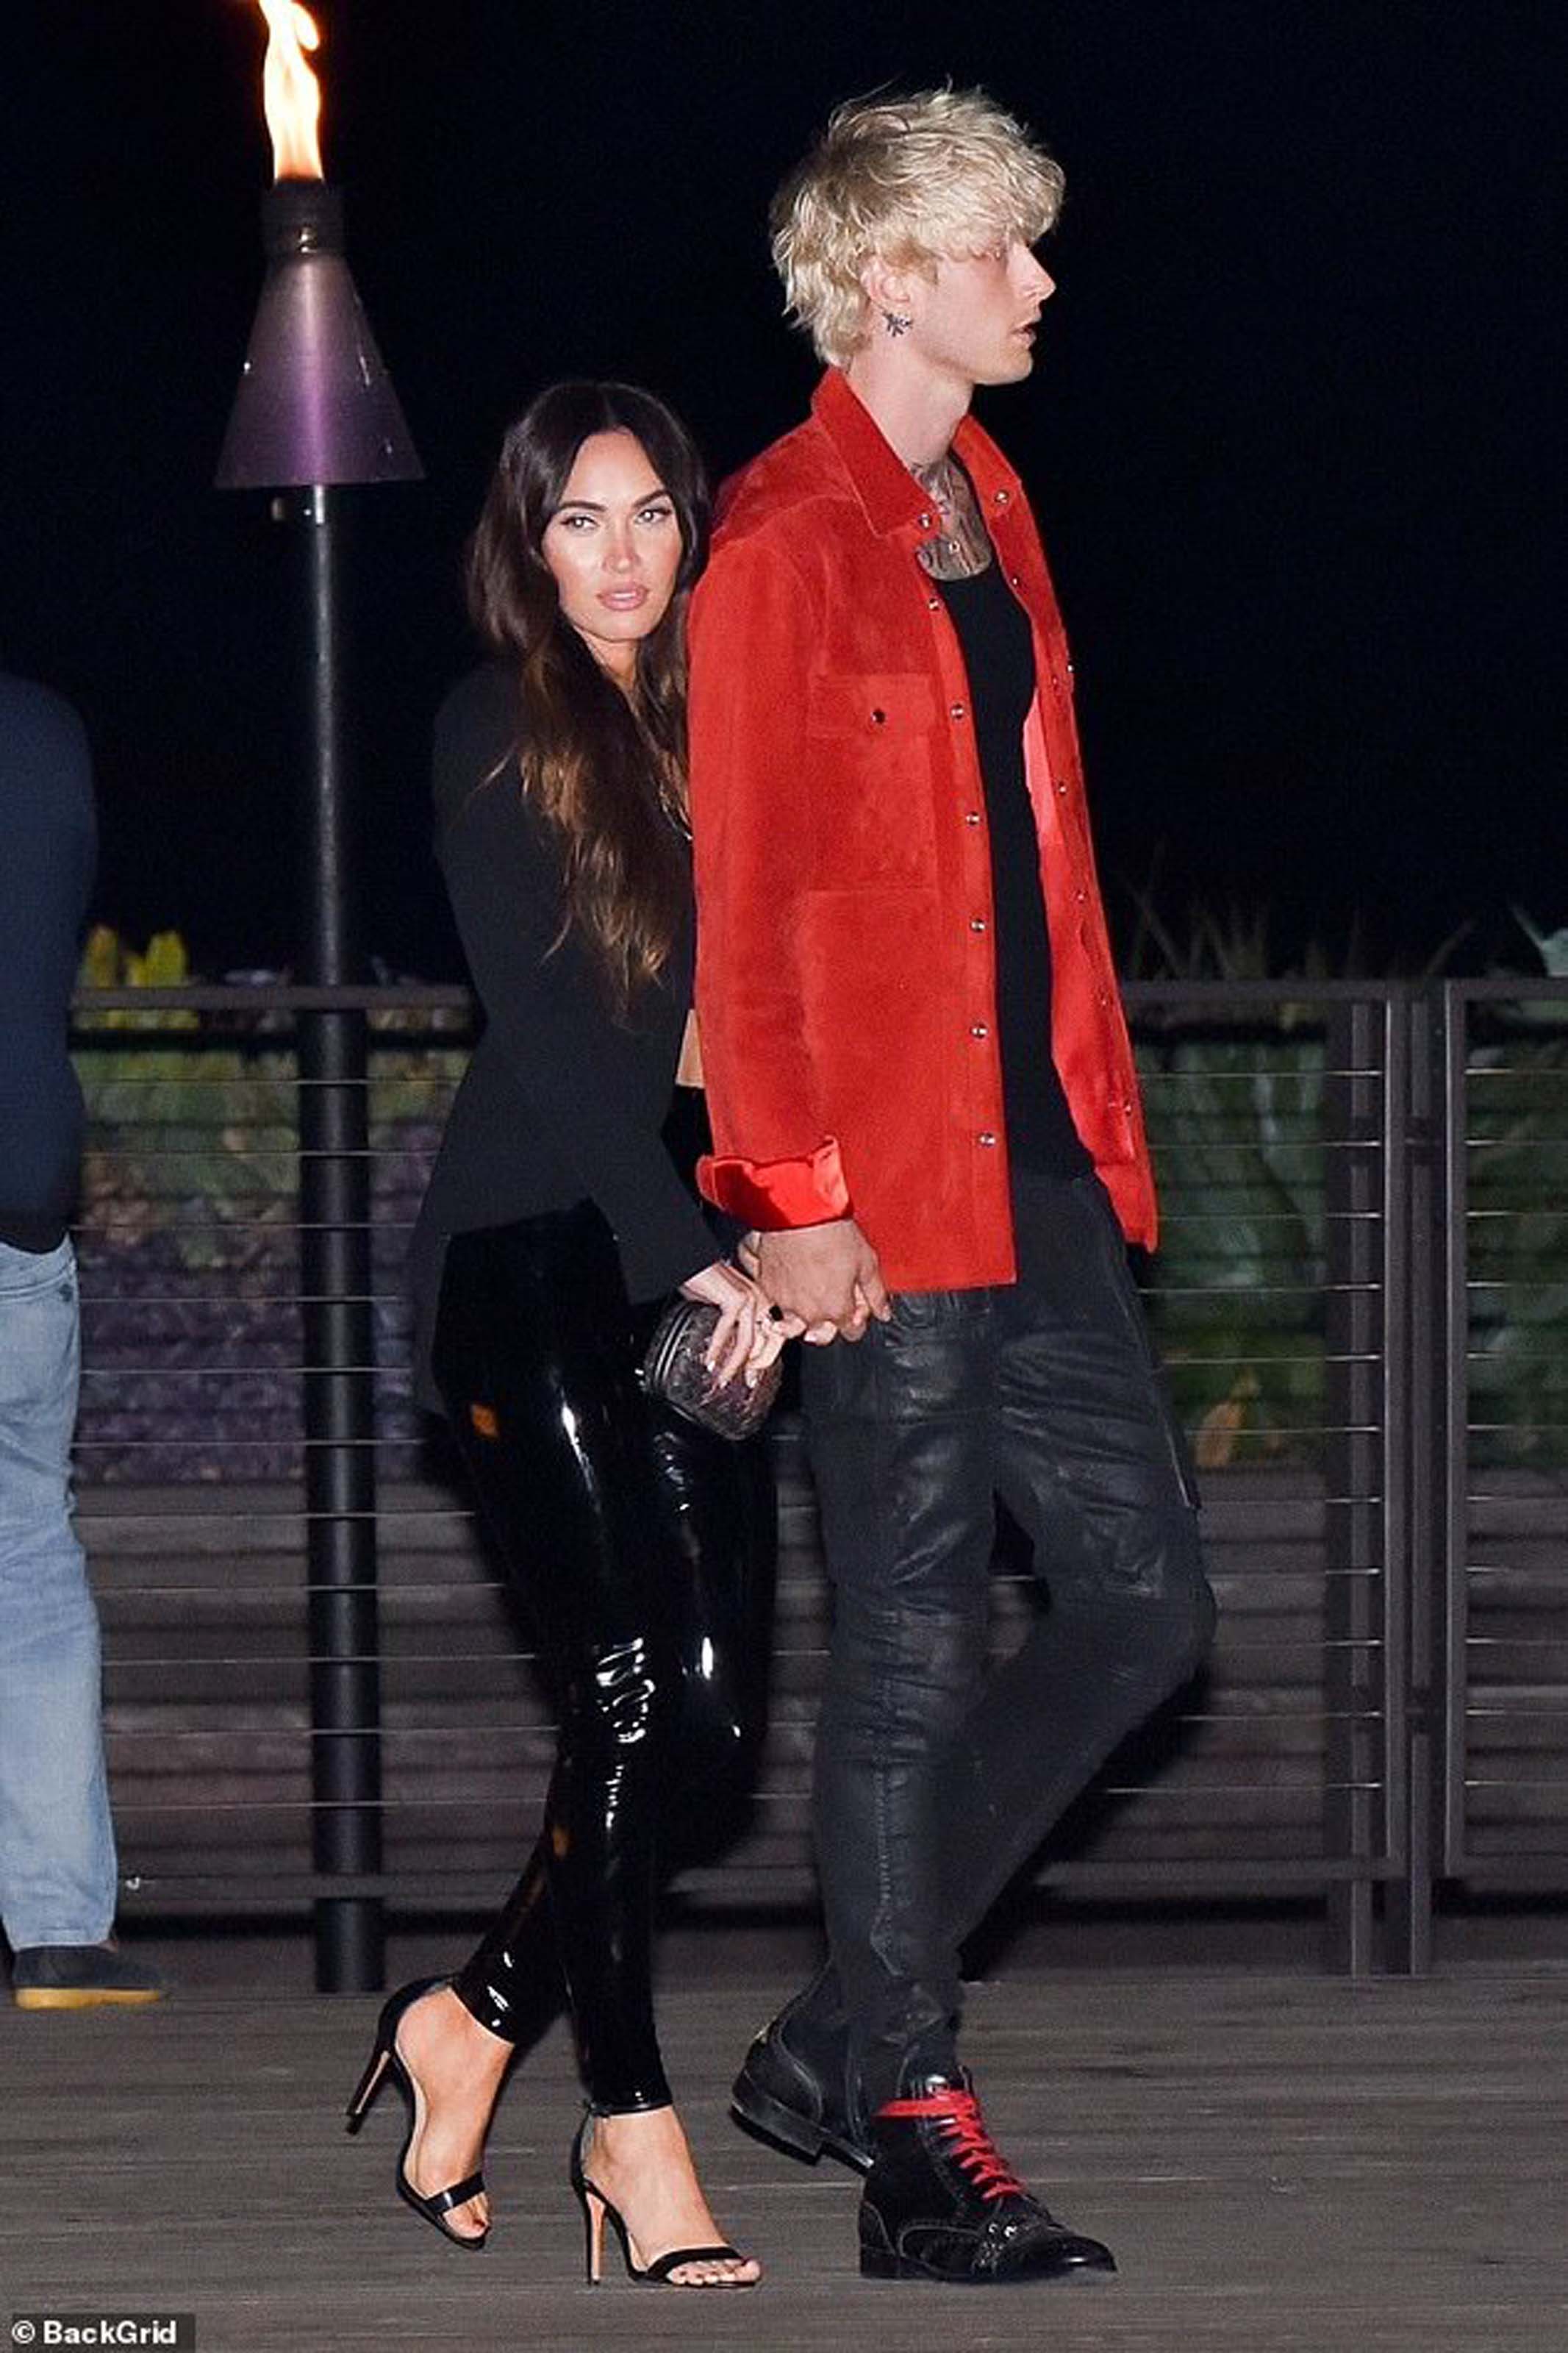 Megan Fox out at dinner date in Malibu